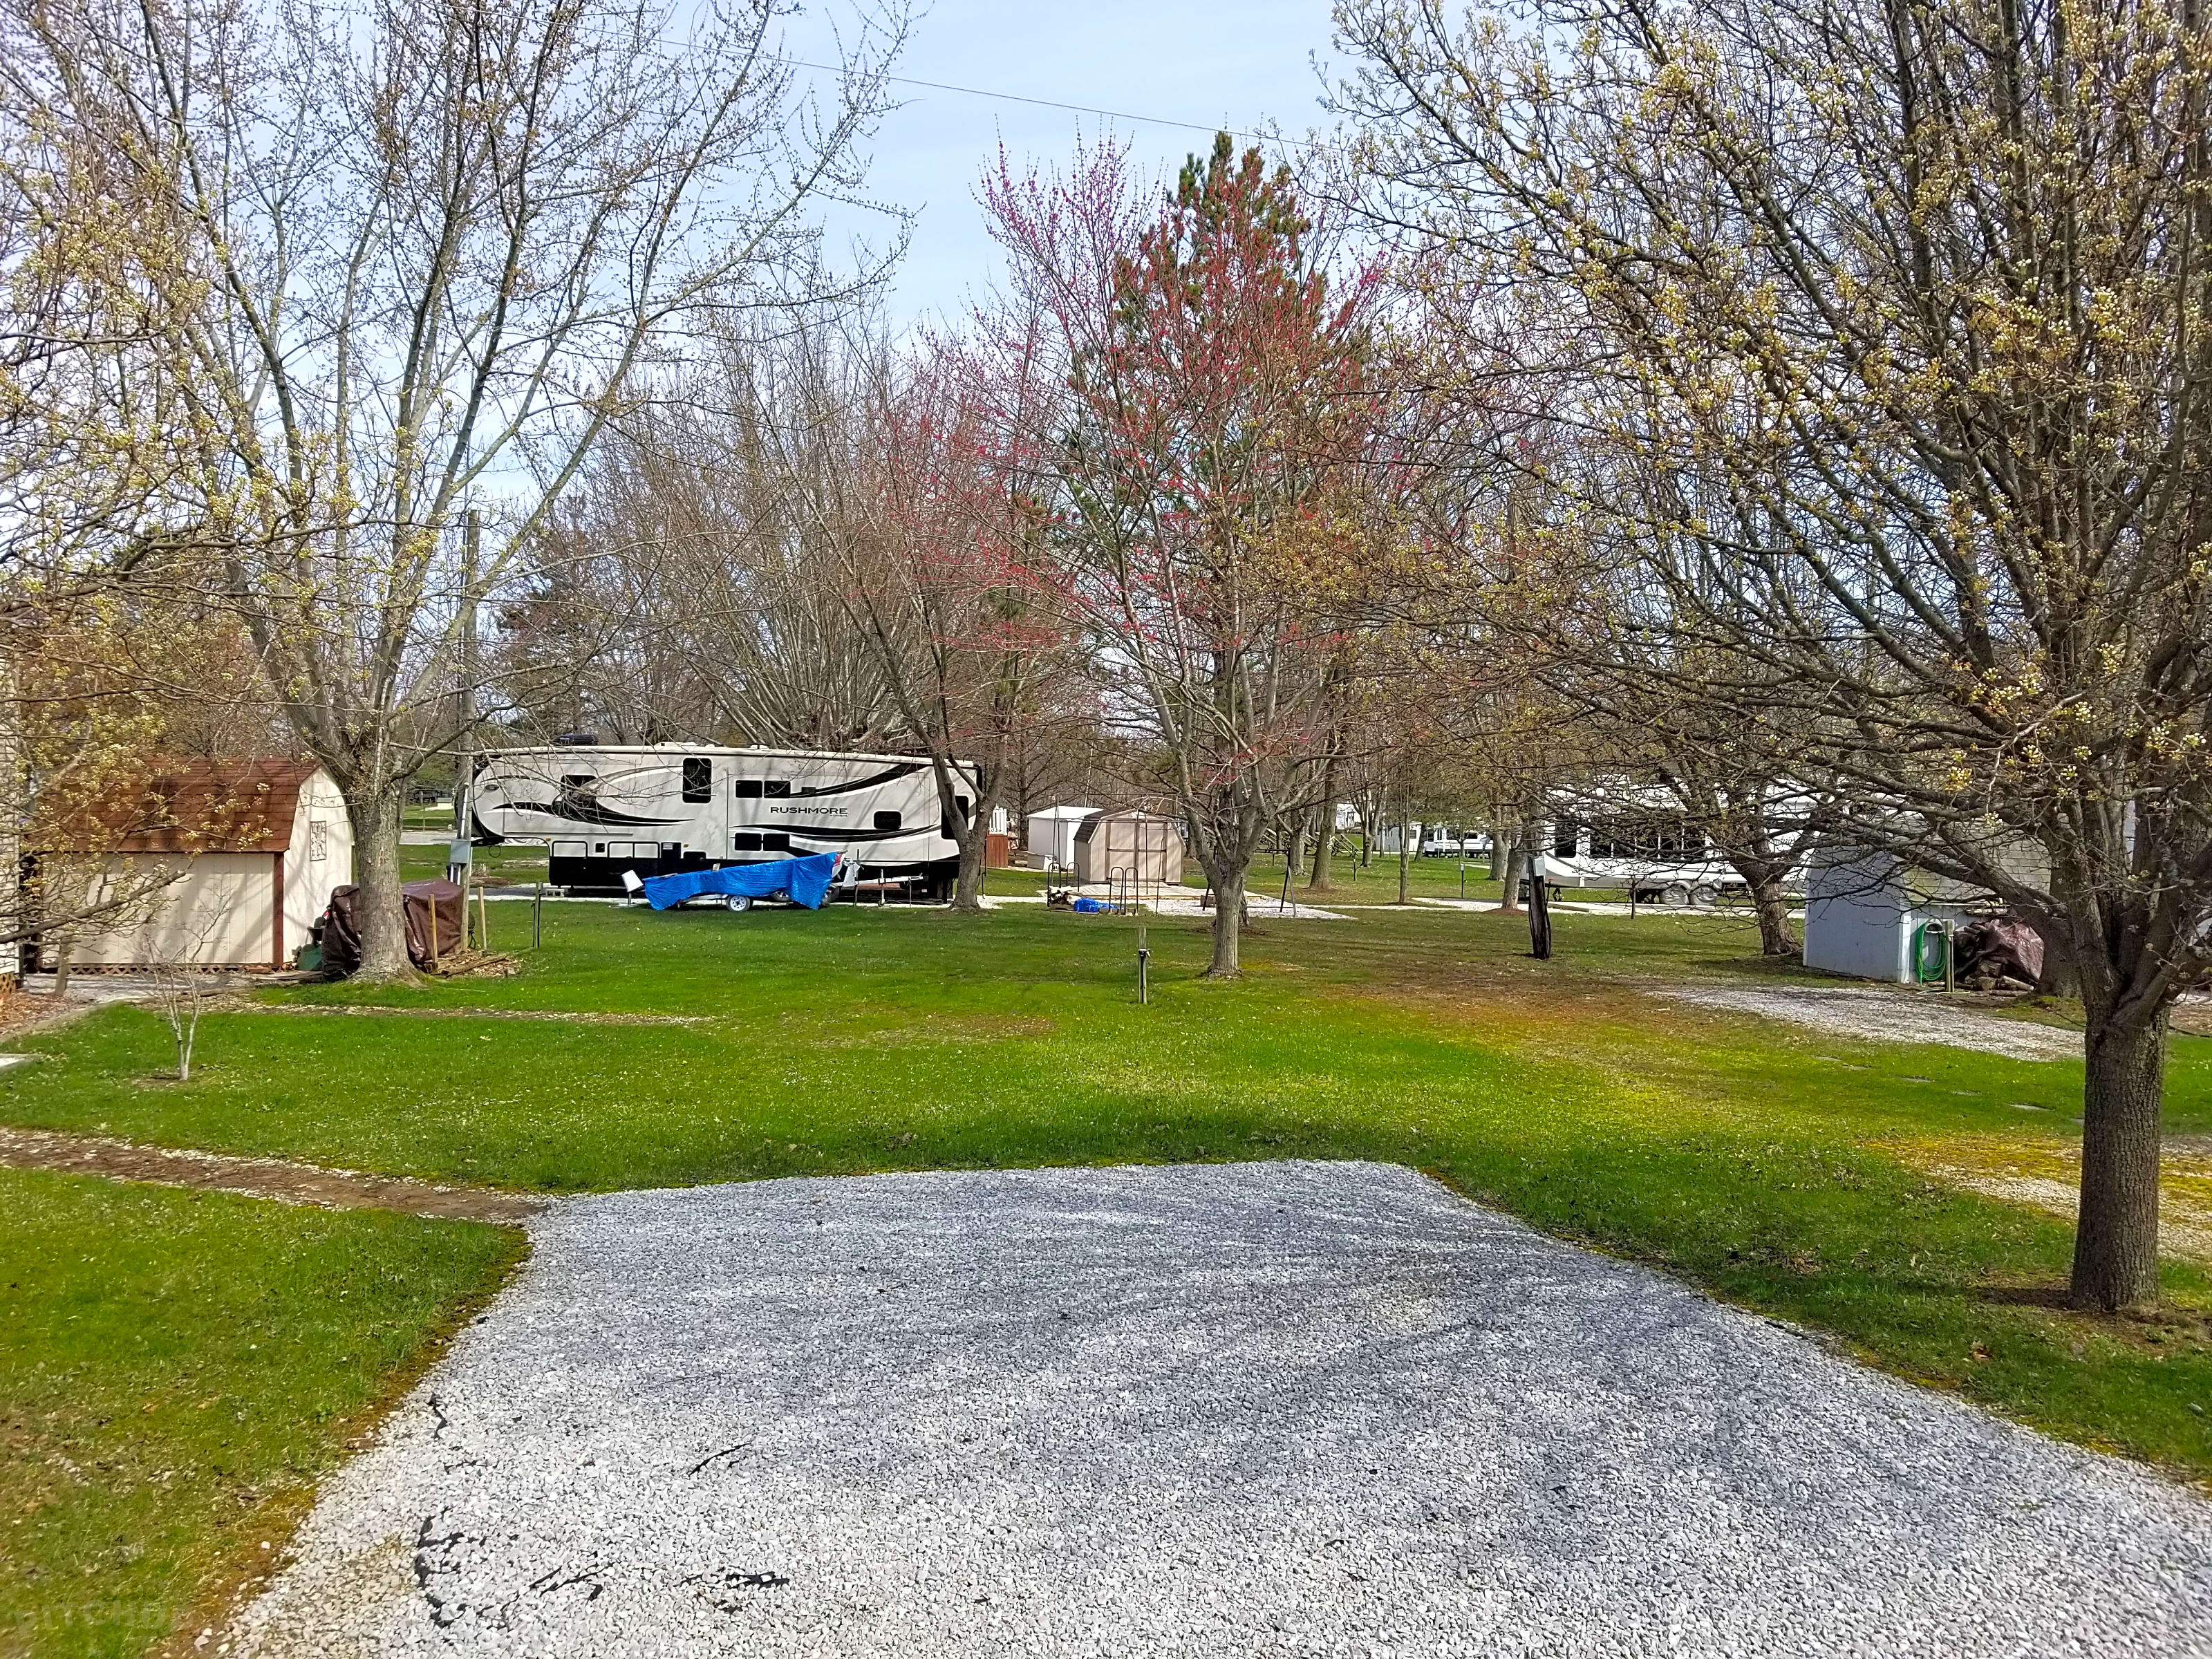 Claremar Twin Lakes Camping Resort, New London Updated 2020 prices